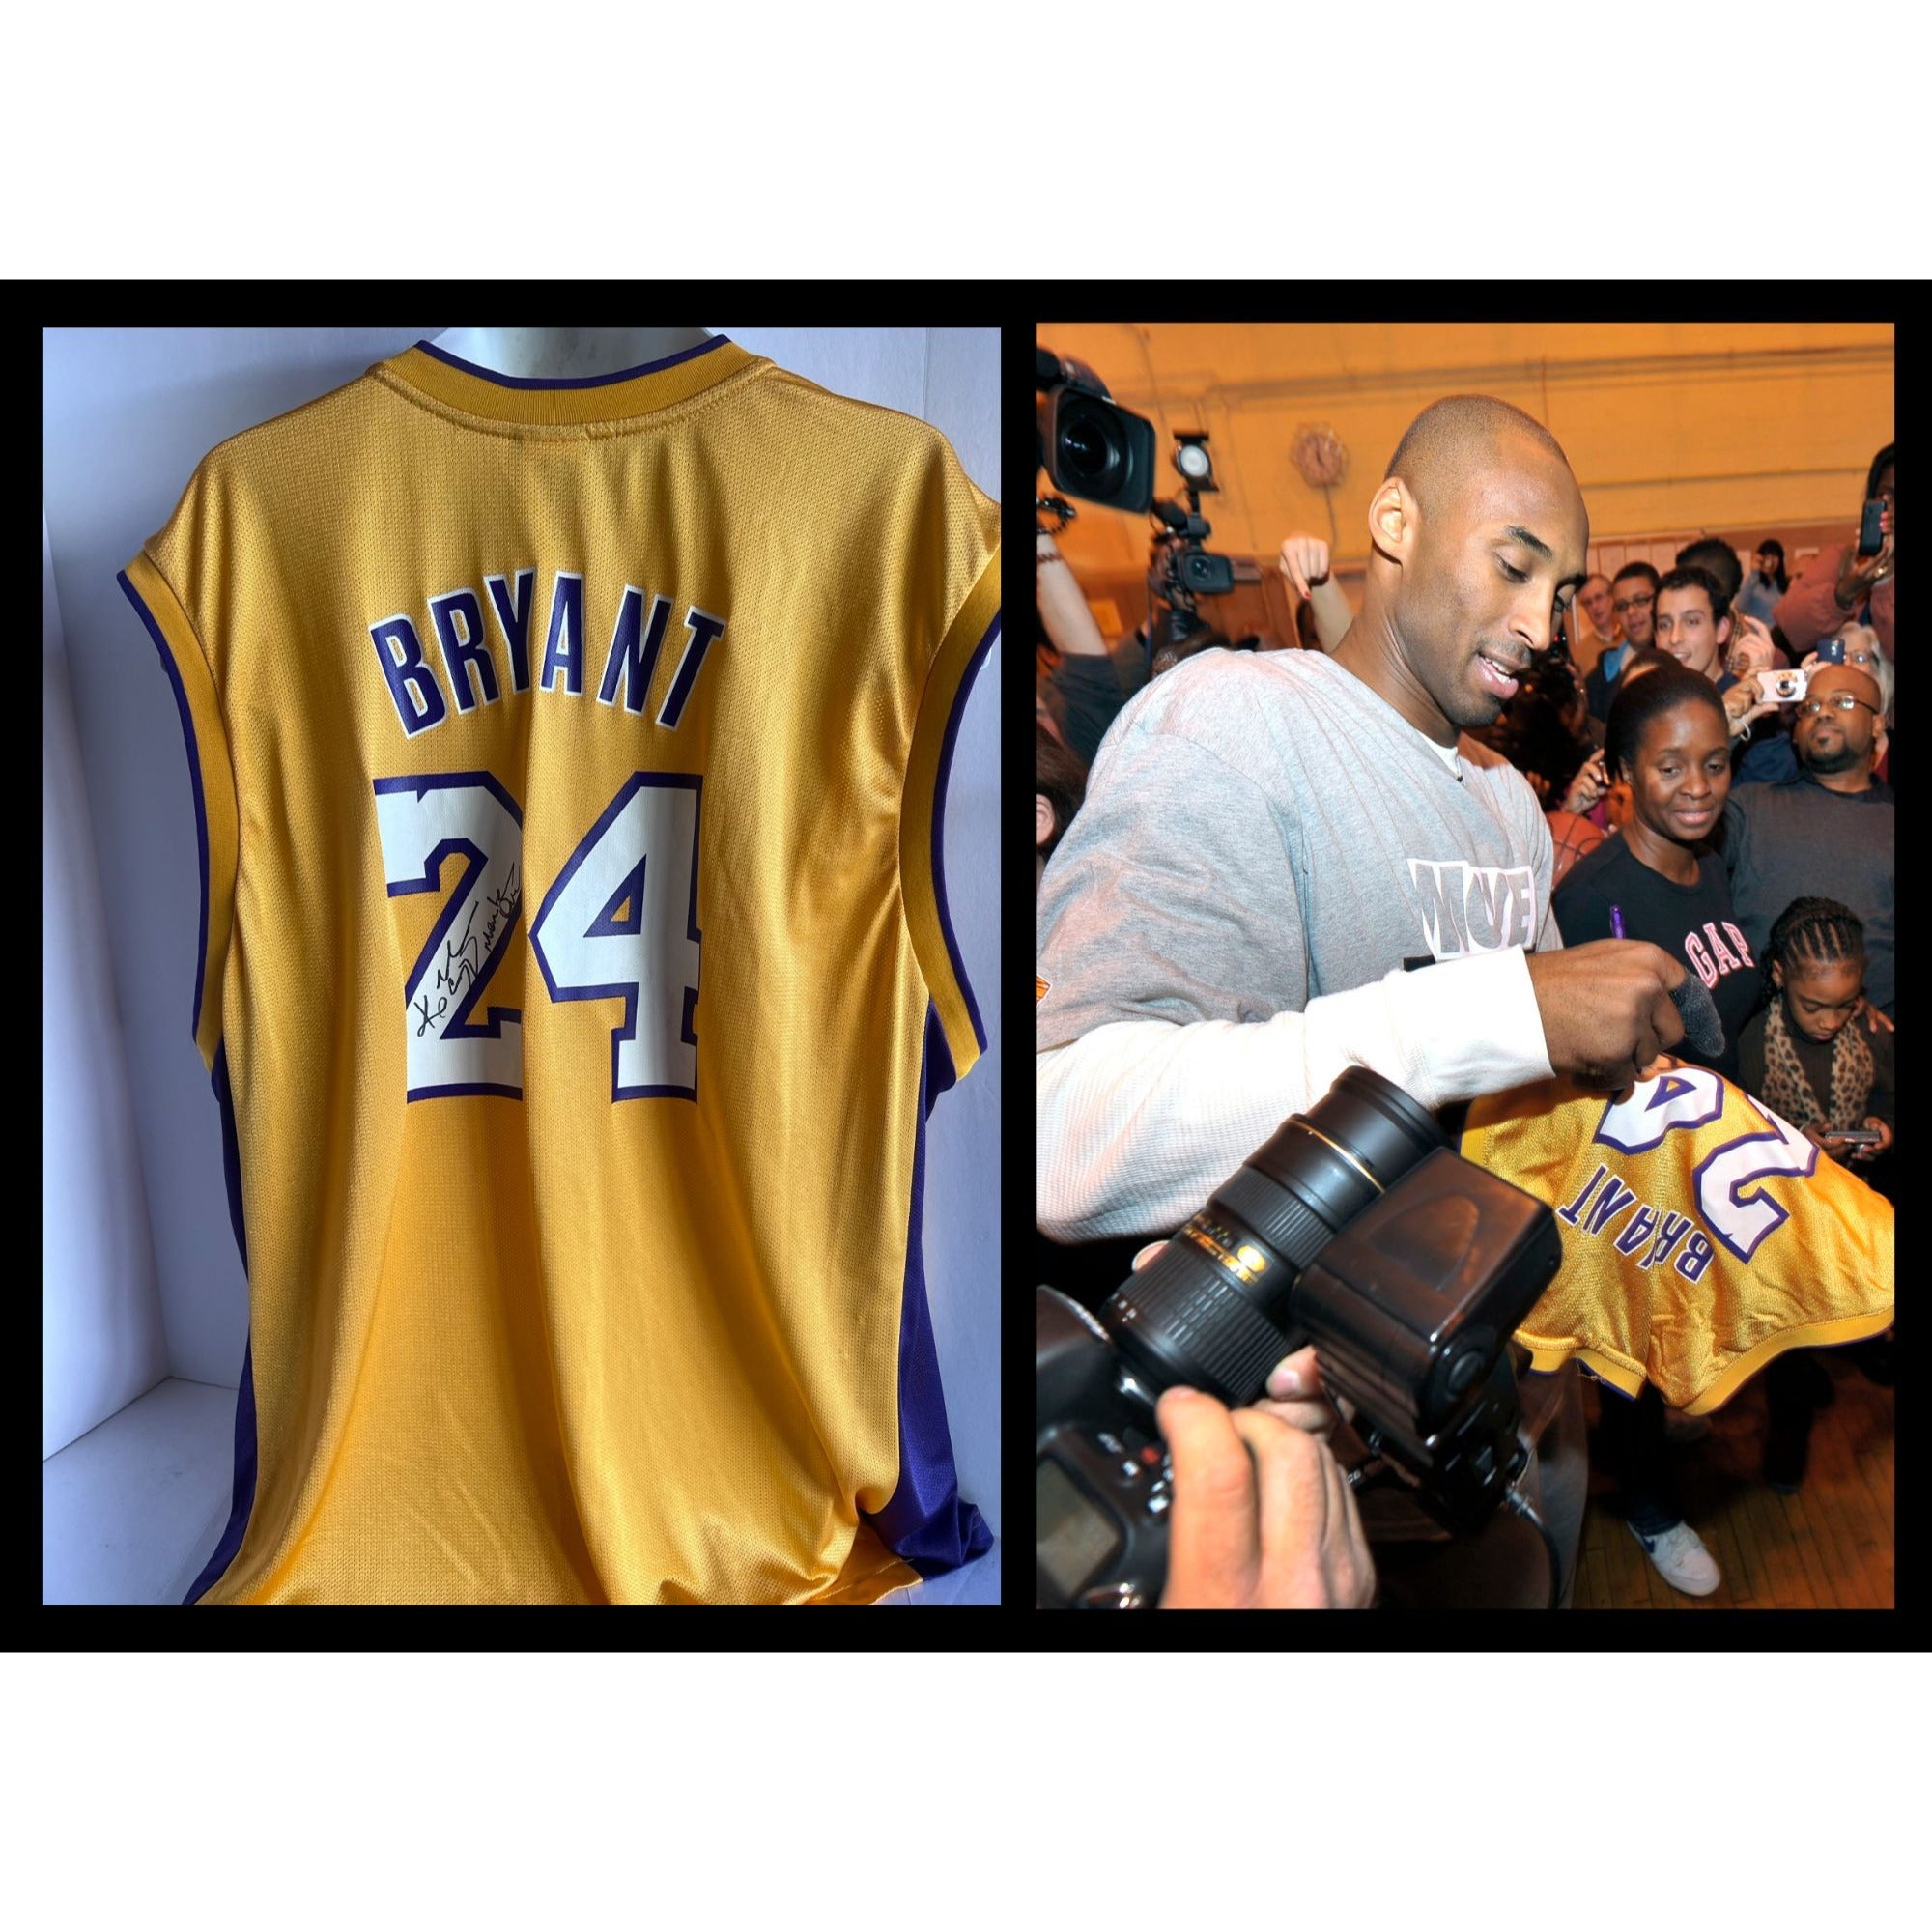 Kobe Bryant 'Mamba Out' signed and inscribed Los Angeles Lakers sixe XL Reebok jersey signed with proof